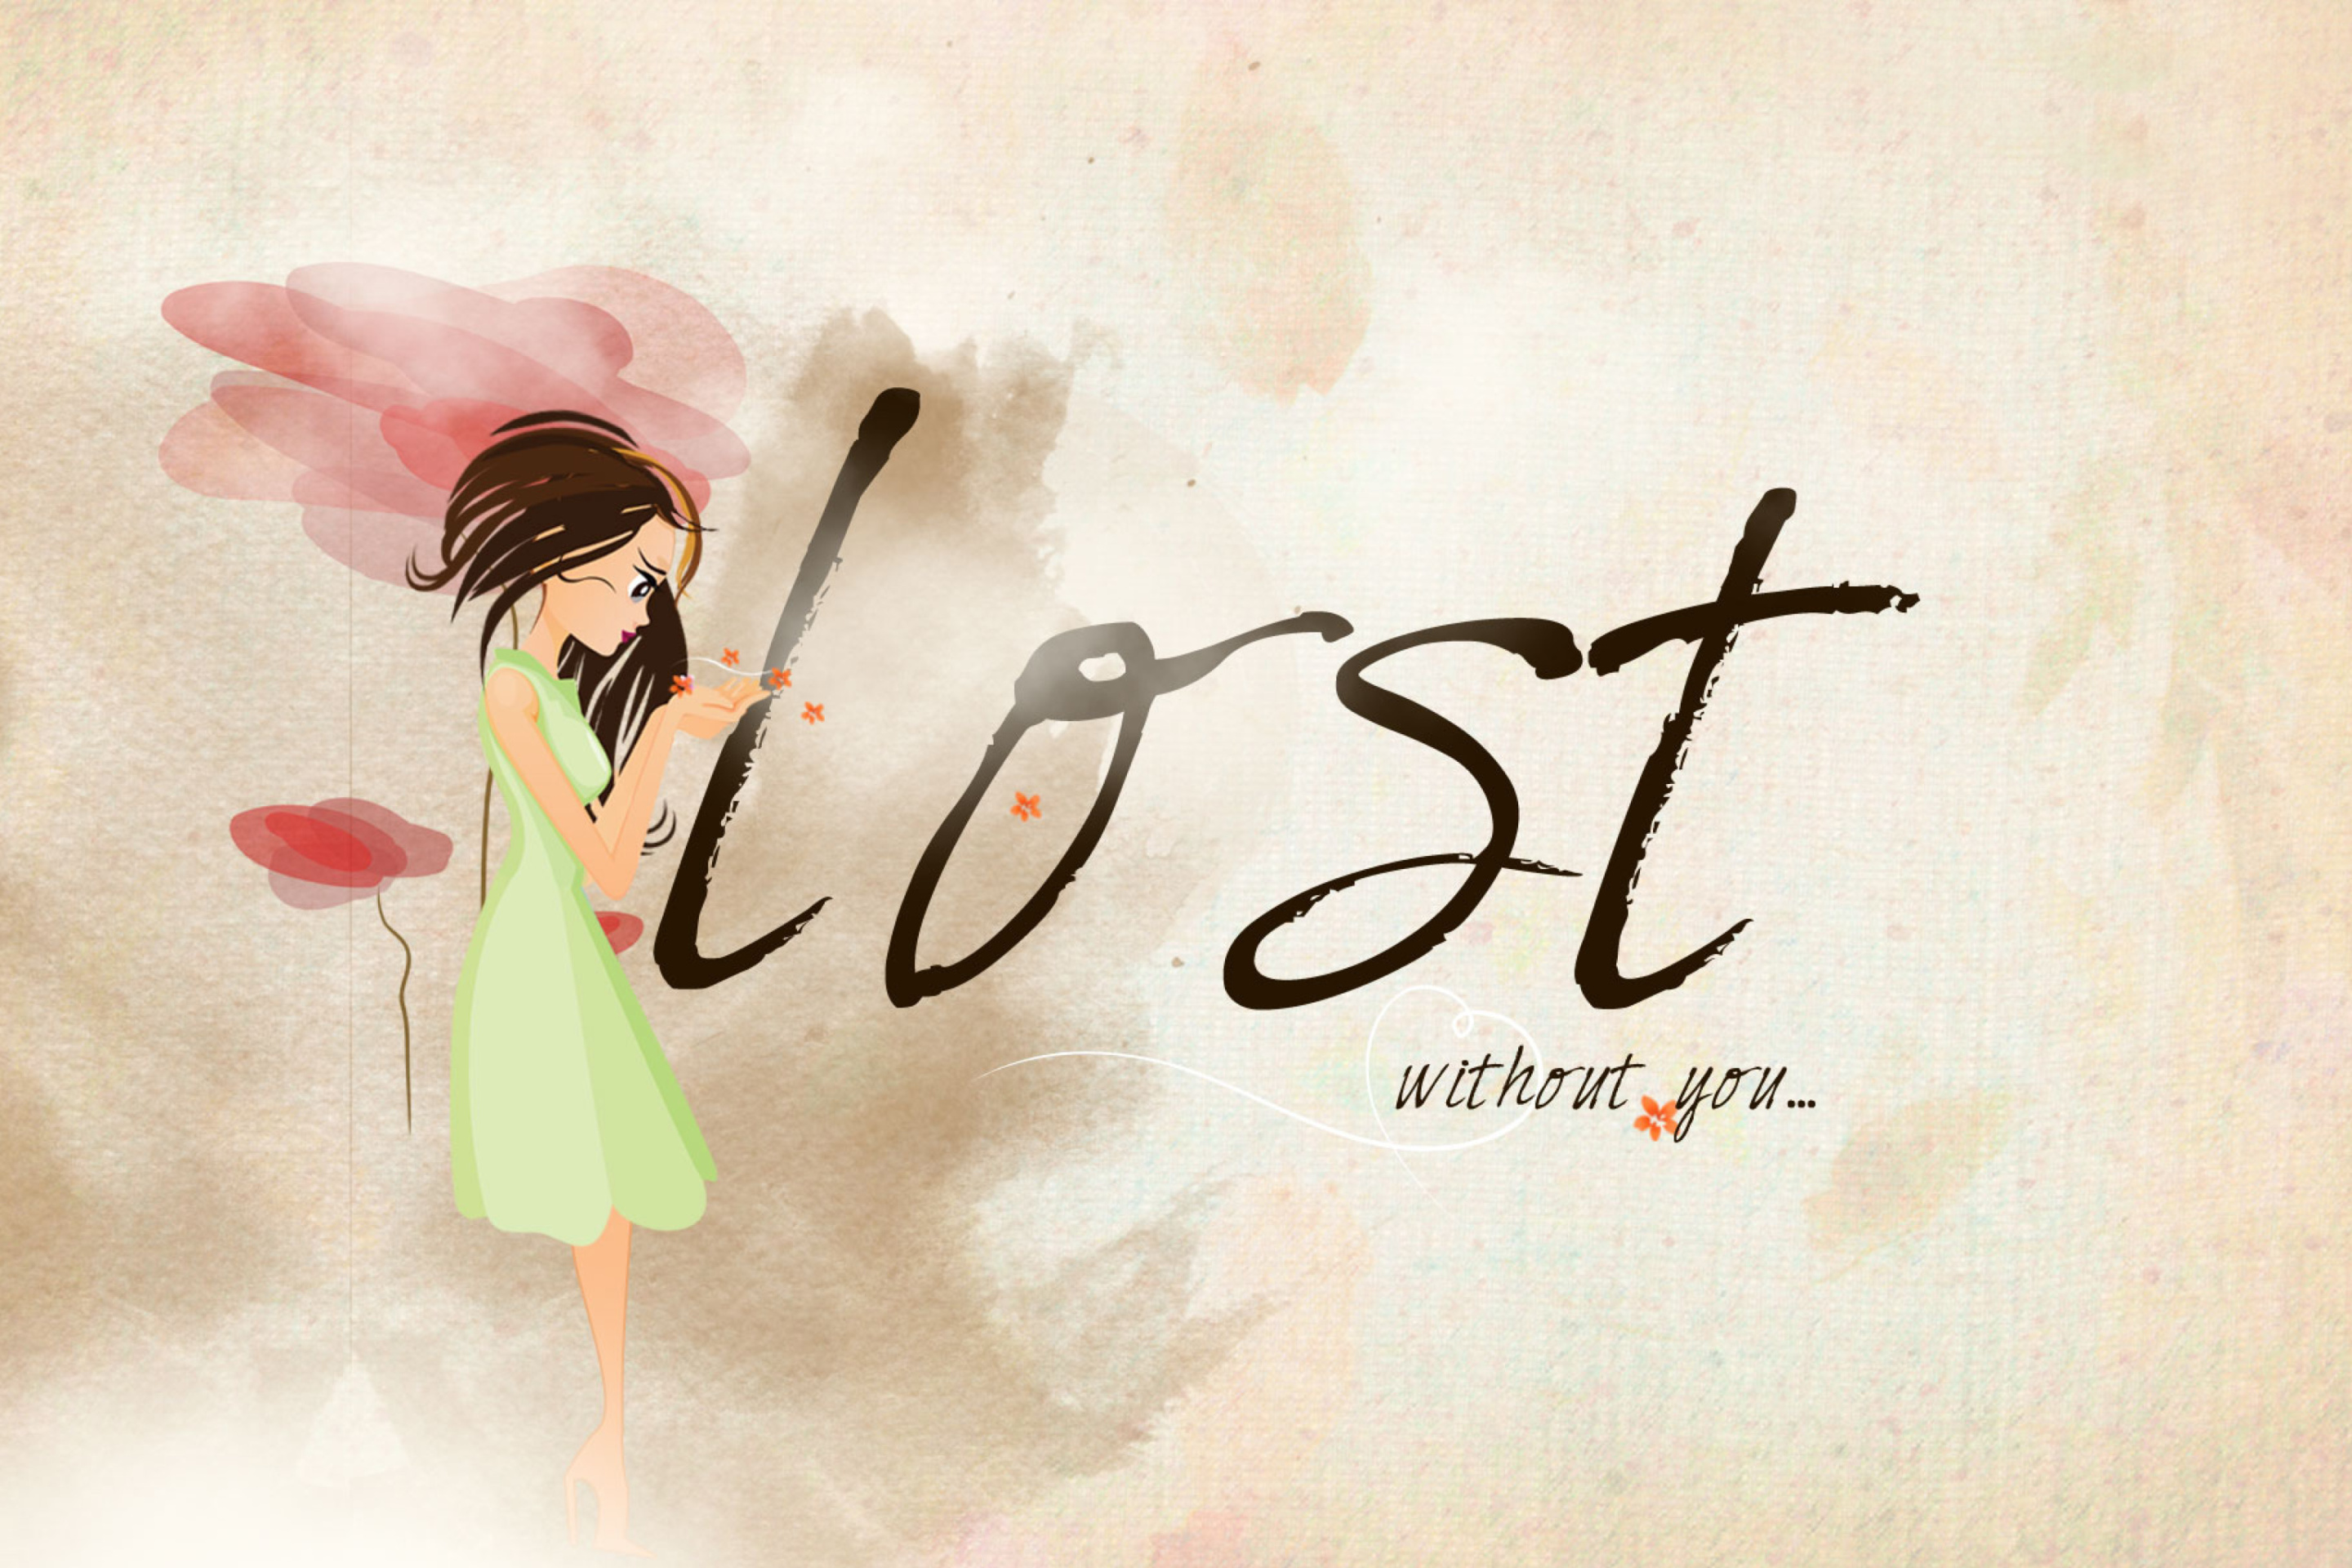 Обои Lost Without You 2880x1920